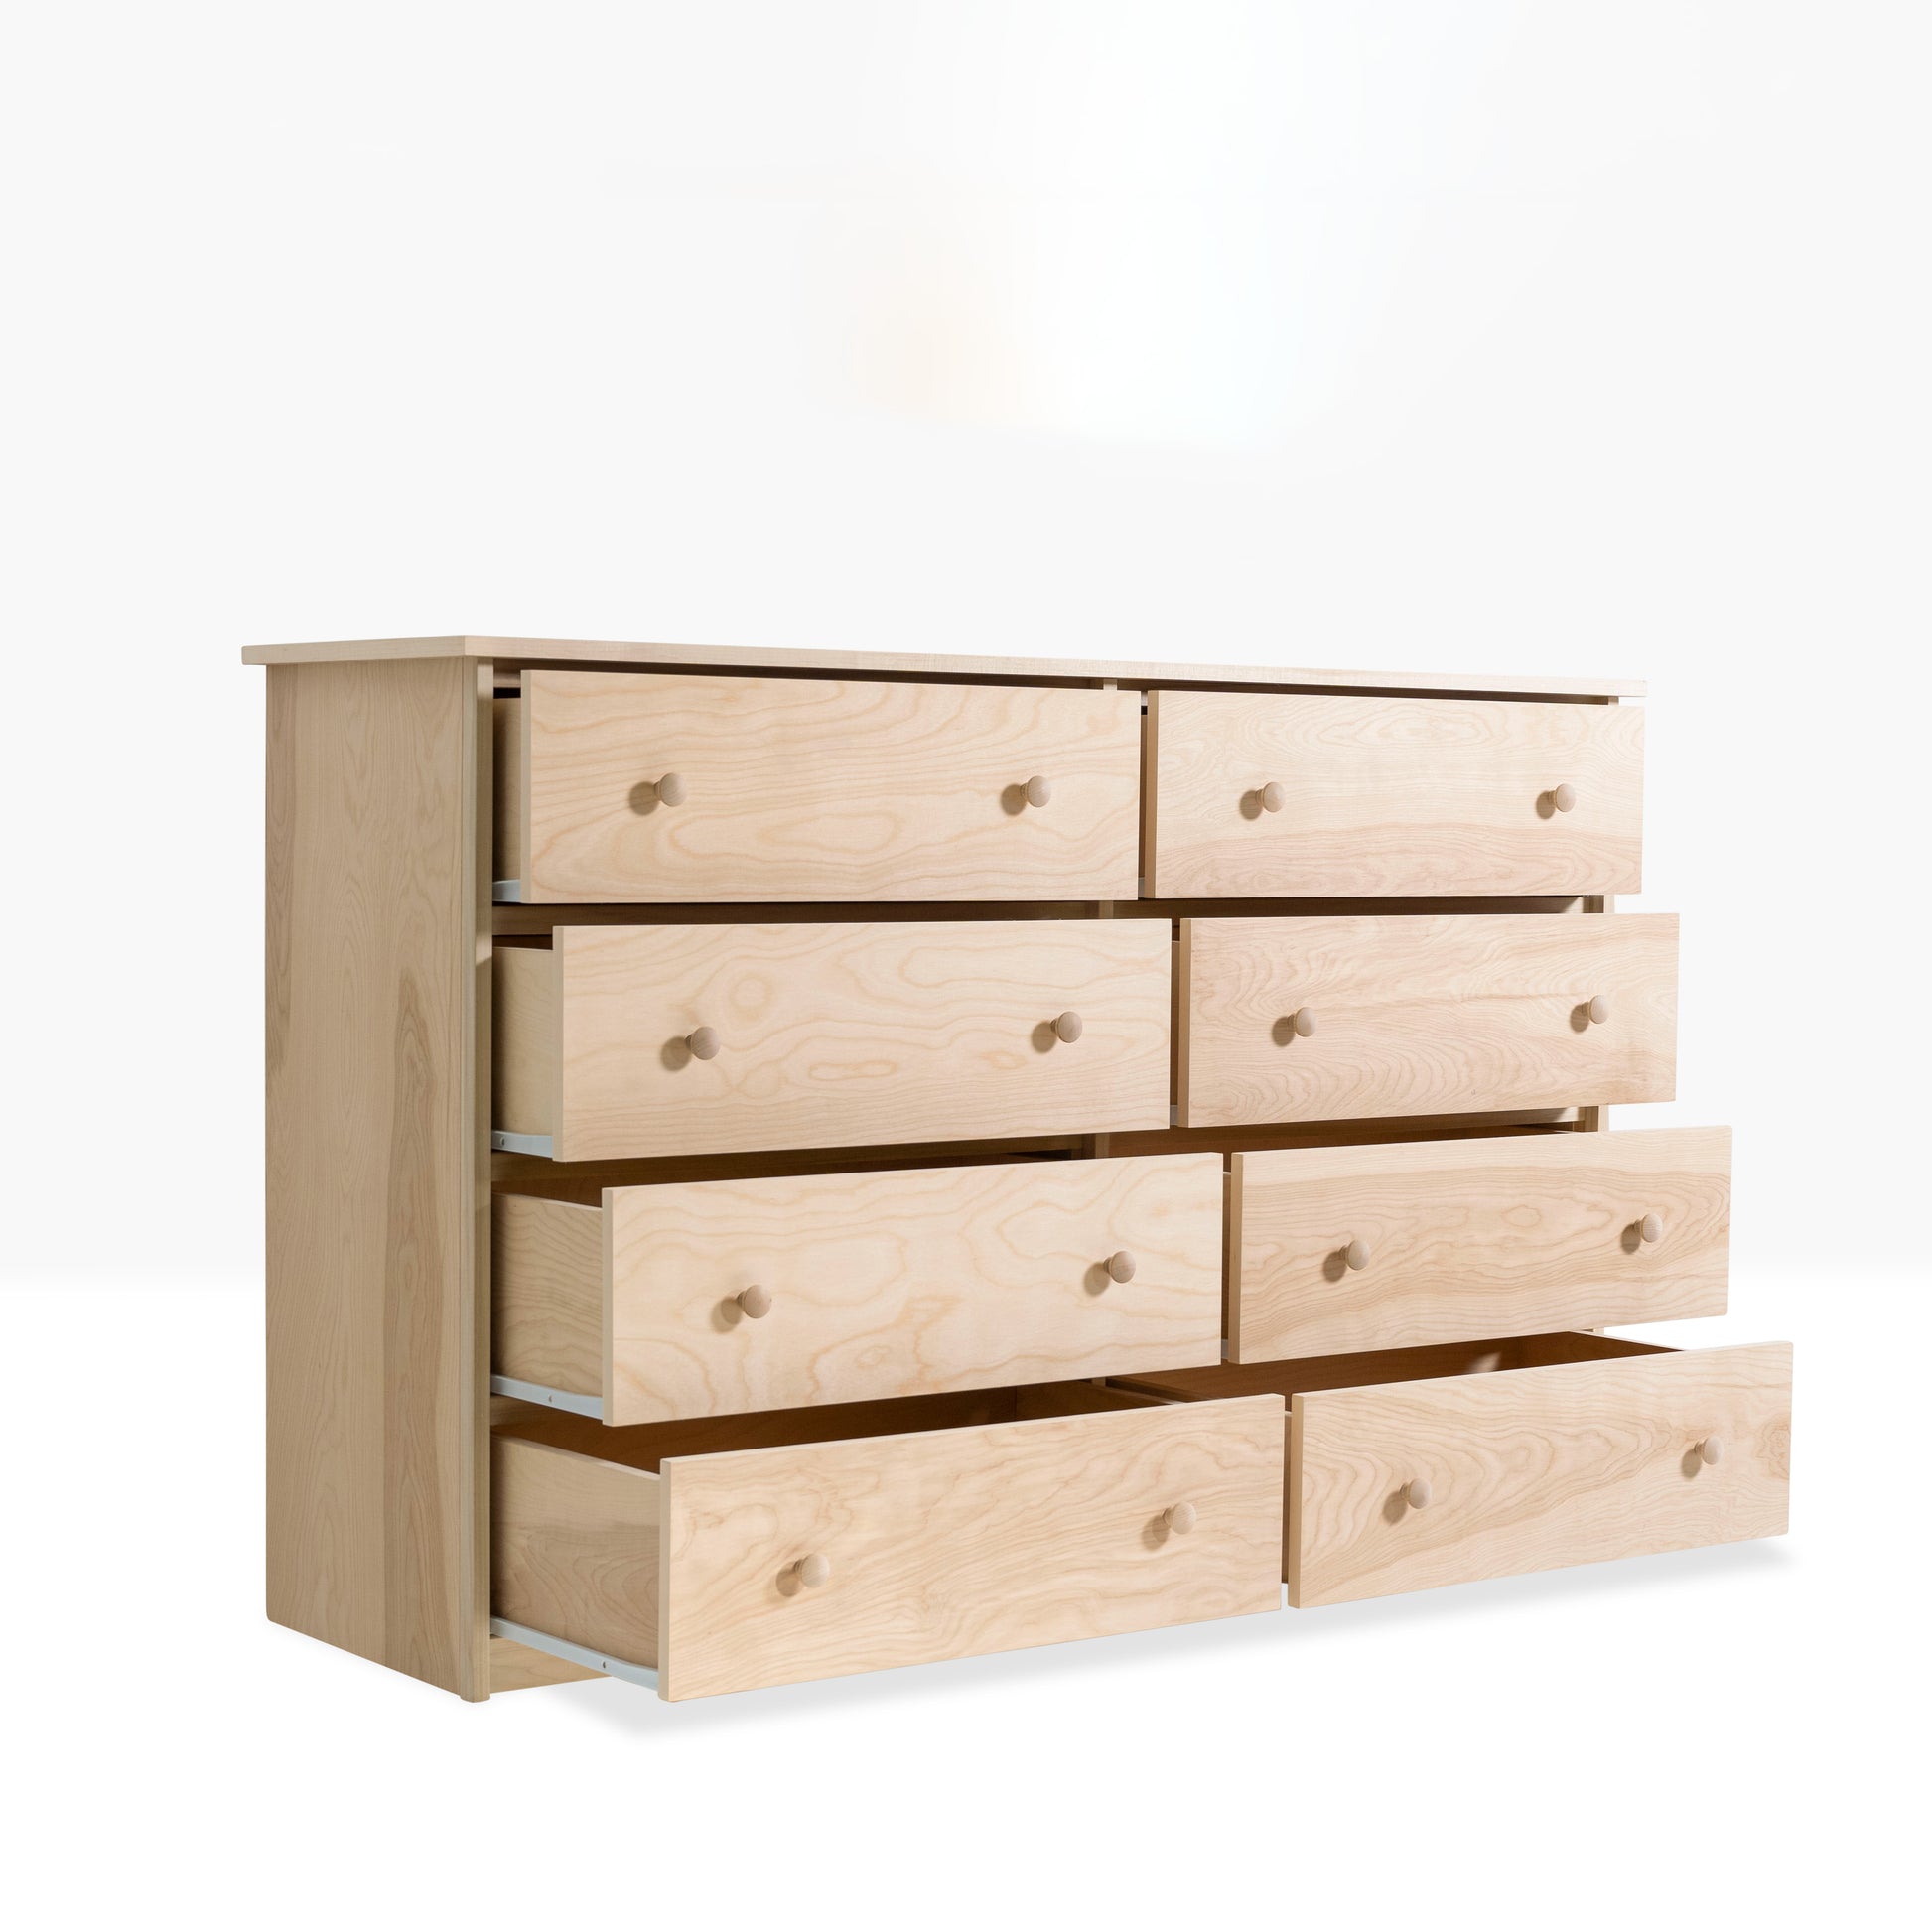 Evergreen Dresser is constructed from pine and birch and is shown with eight drawers. Pictured with drawers open to show storage capacity.